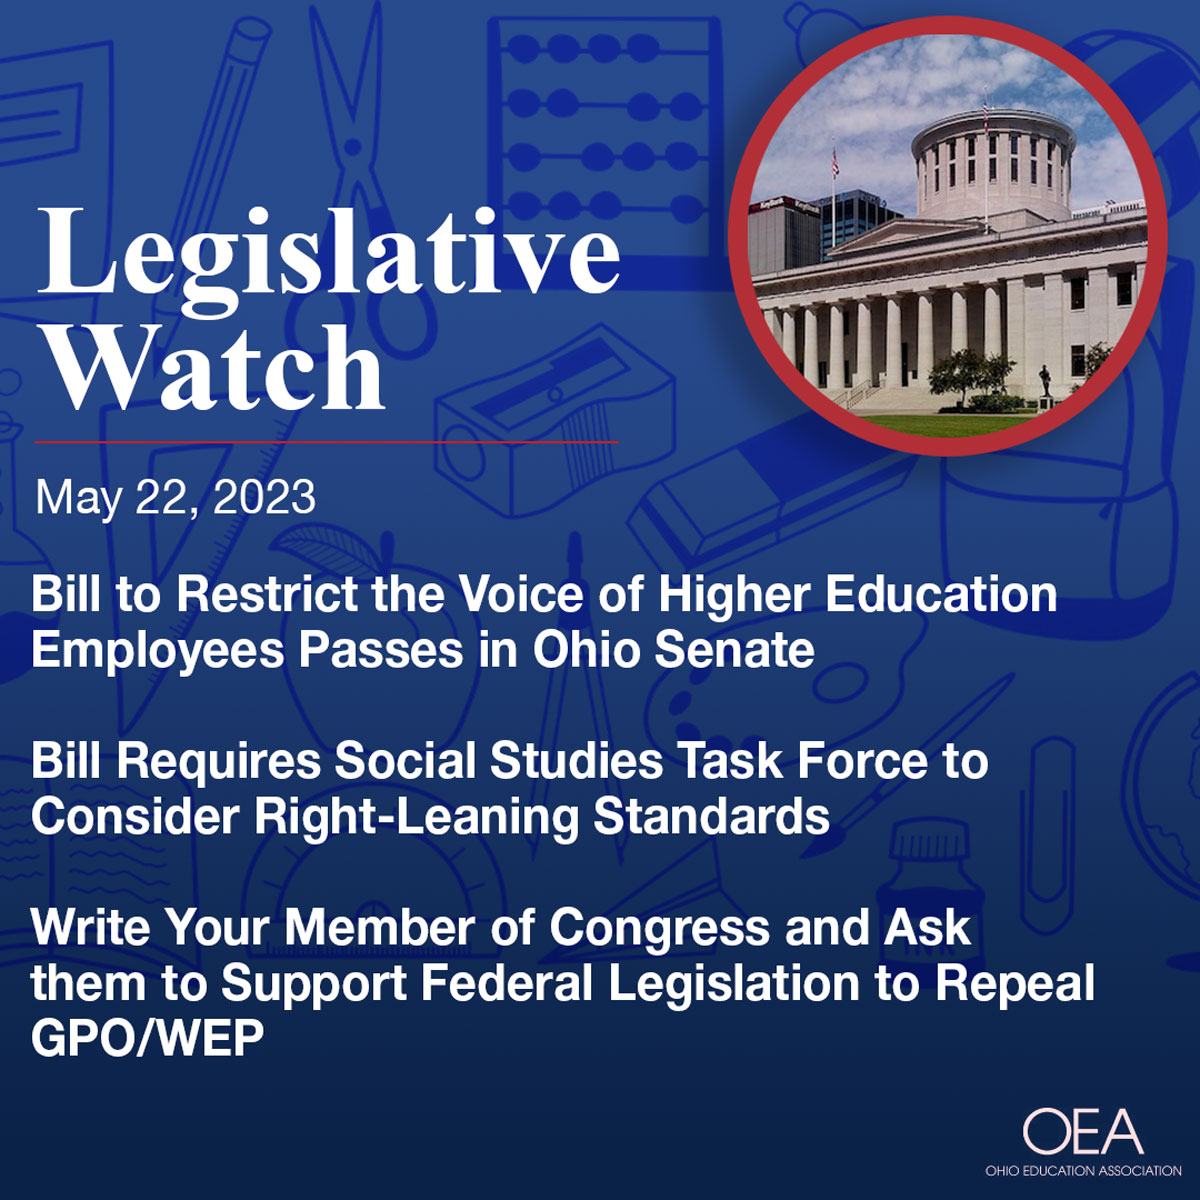 The newest #LegislativeWatch is out! 👀 Covering #publiceducation issues at the #ohiostatehouse. Includes updates on #senatebill83, #housebill103, and the repeal of GPO/WEP

Read the full issue👇
ohea.org/legislative-wa…